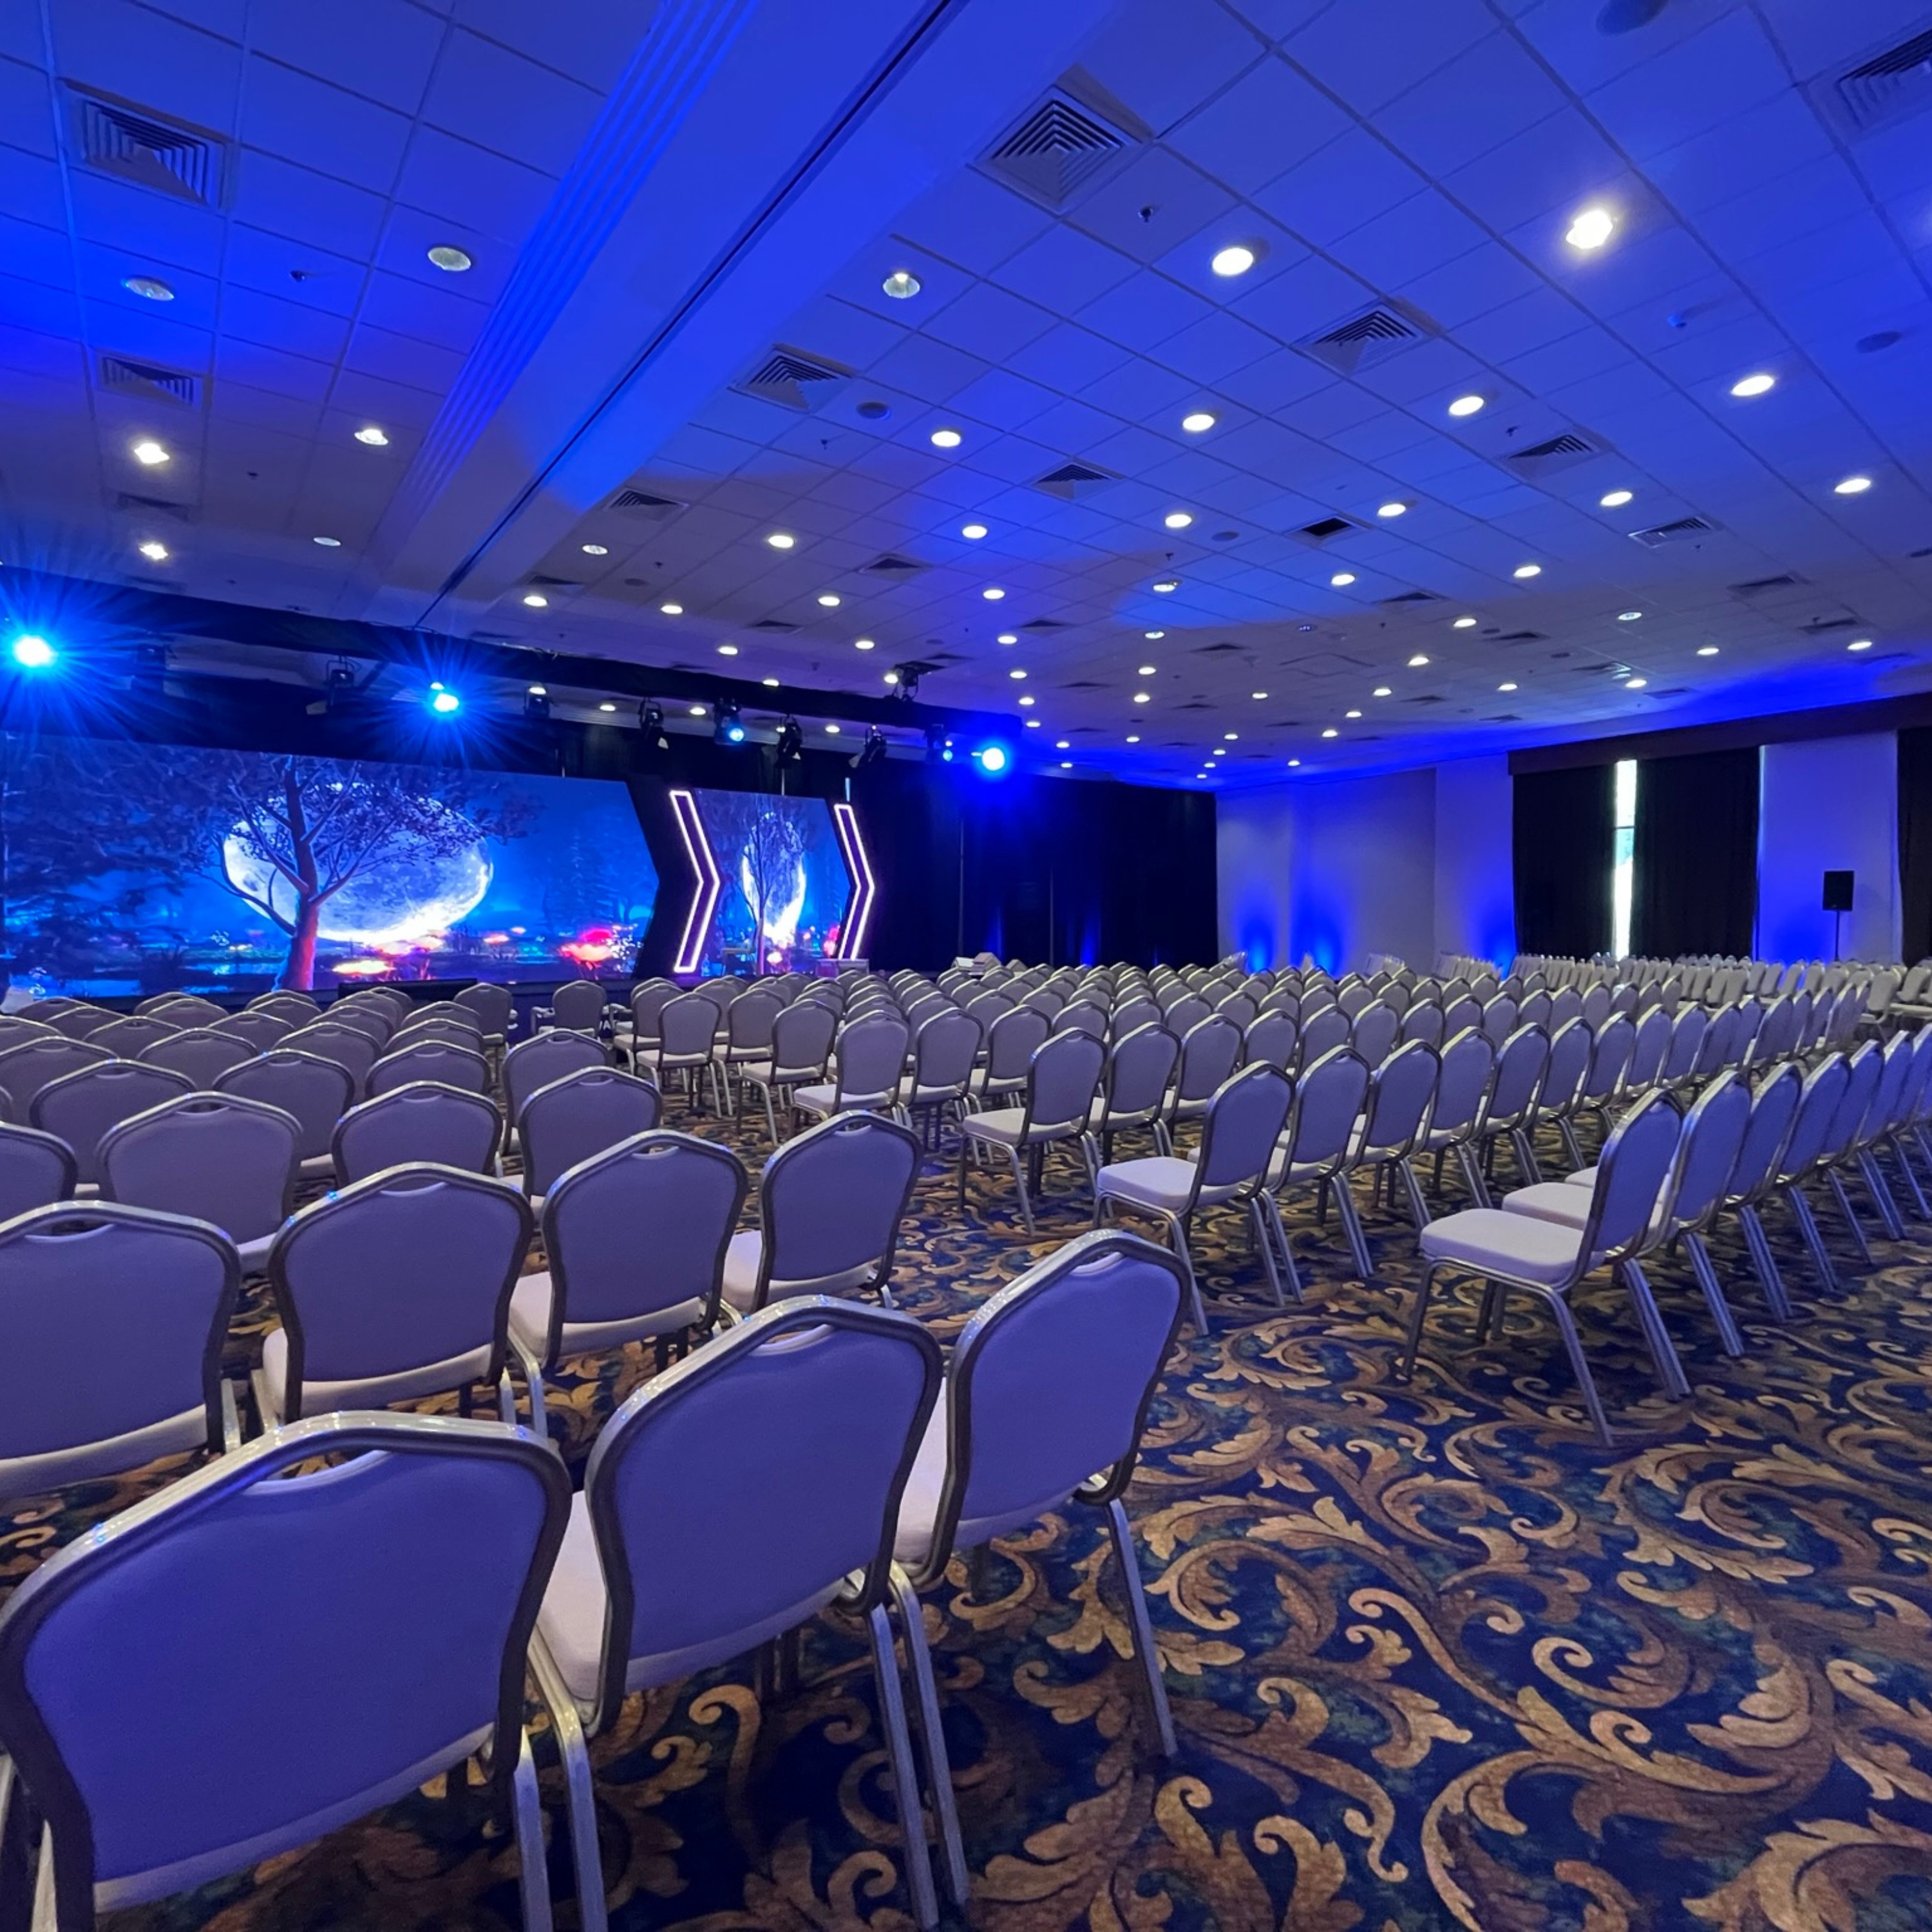 Dead Sea Hall with rows of chairs setup for an event